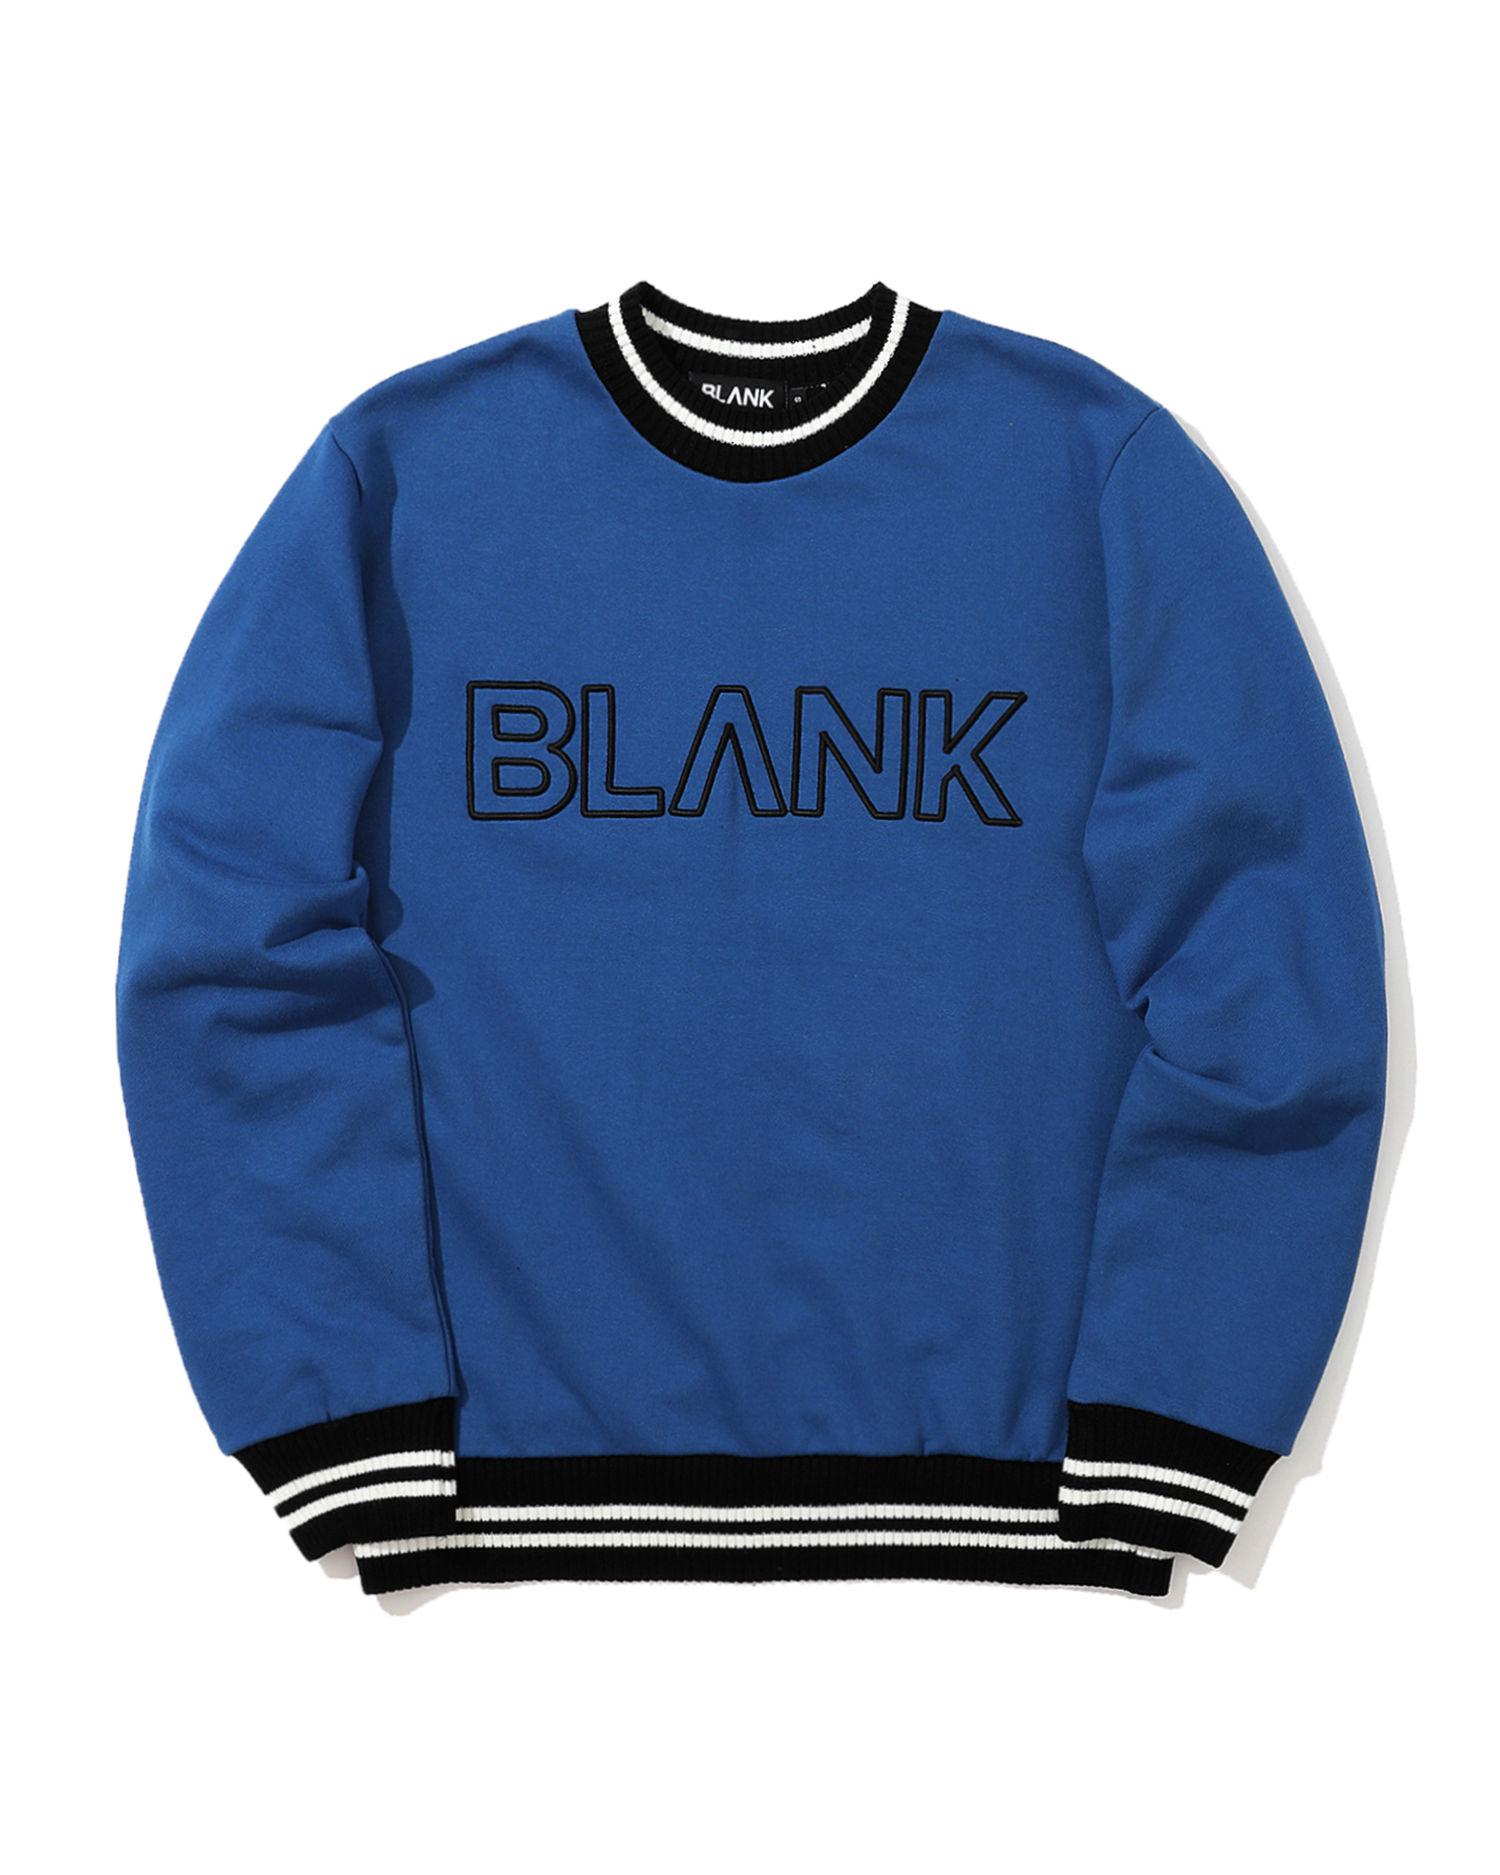 "BLANK" embroidered sweater by BLANK